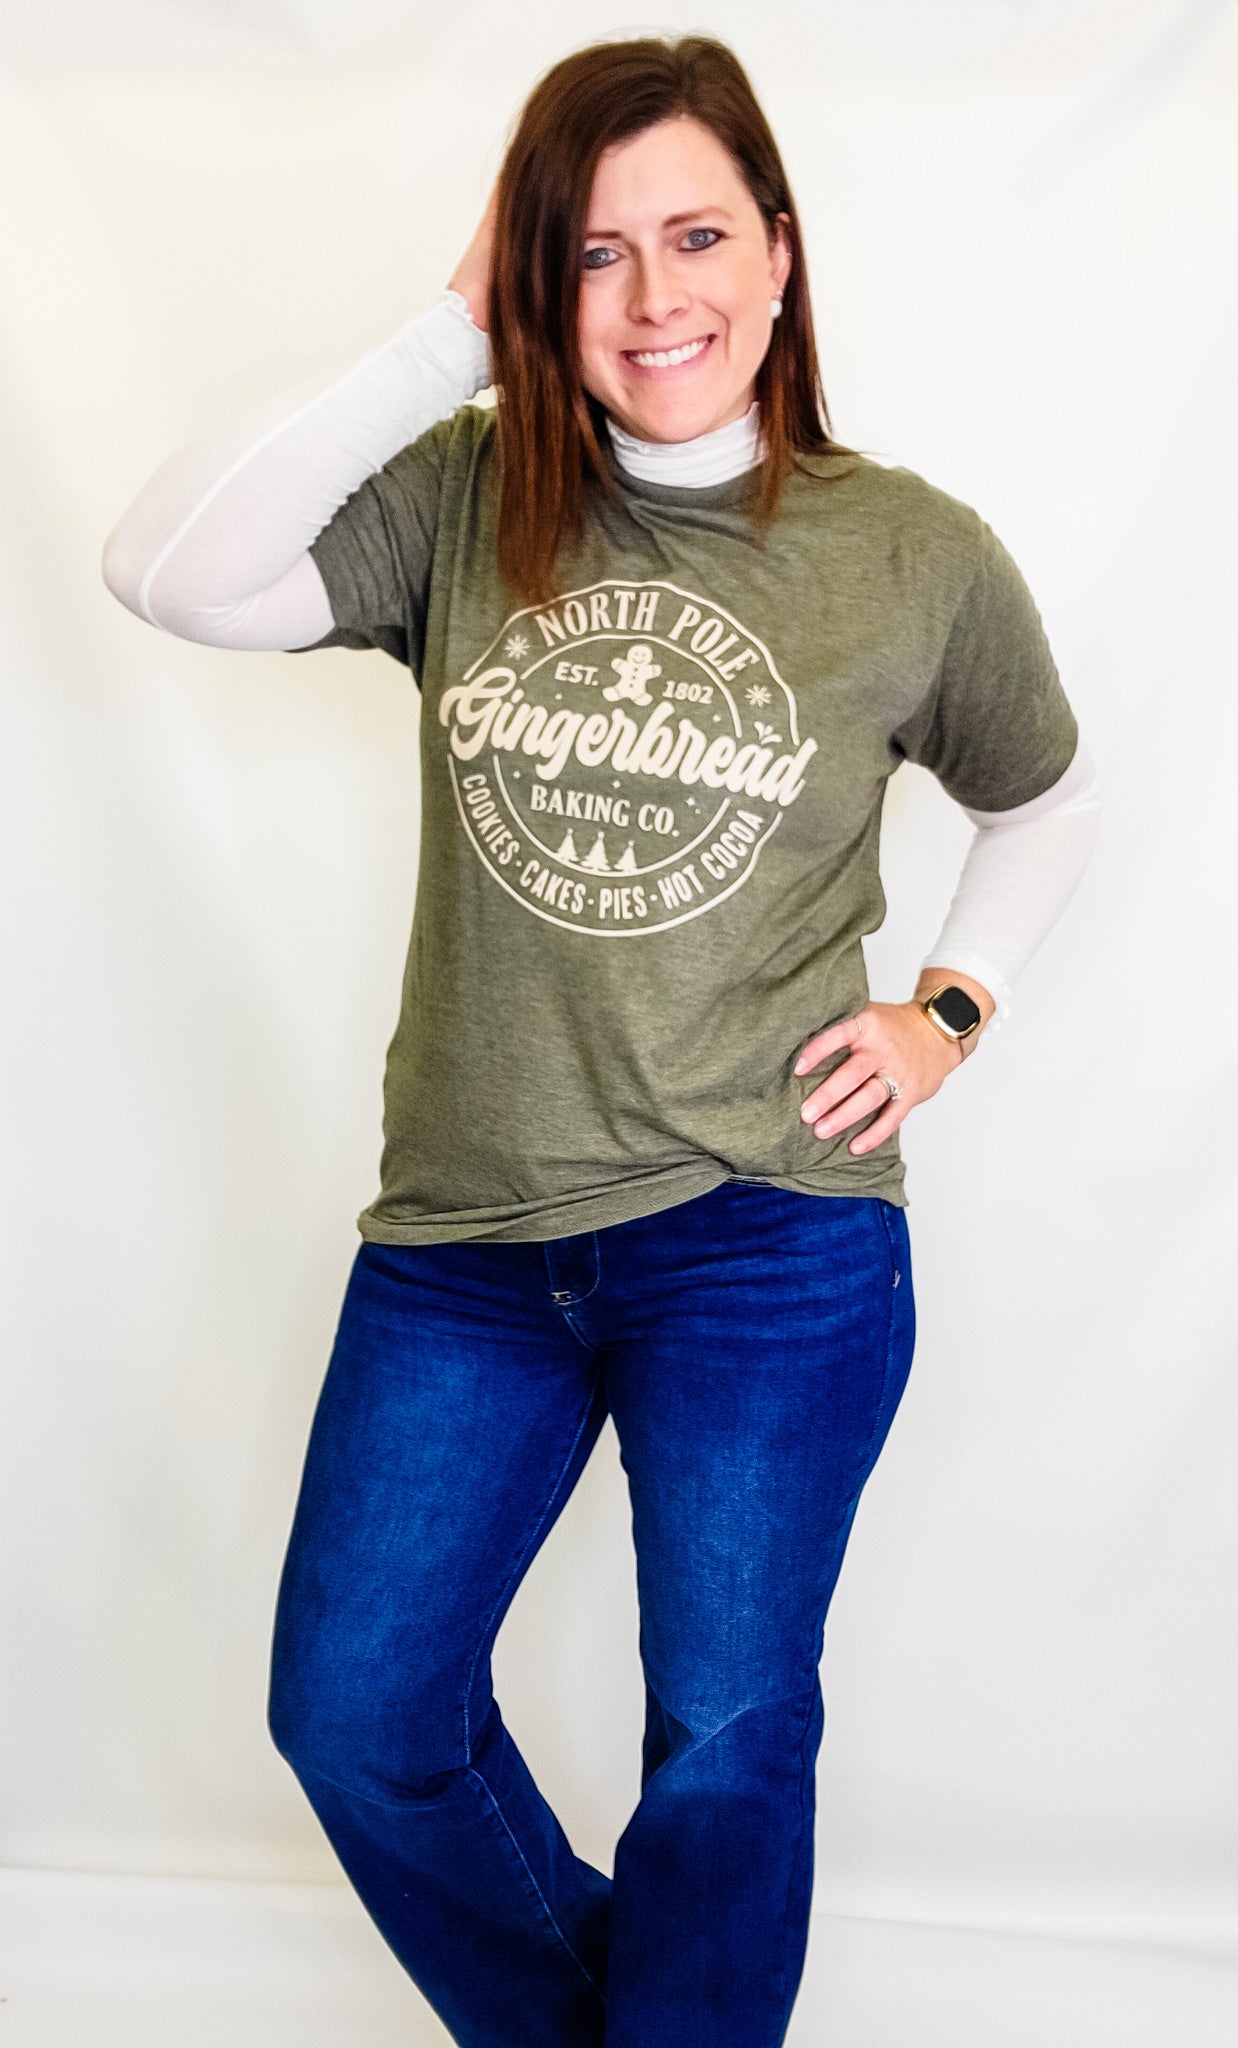 North Pole Gingerbread Baking Co Green Graphic Tee